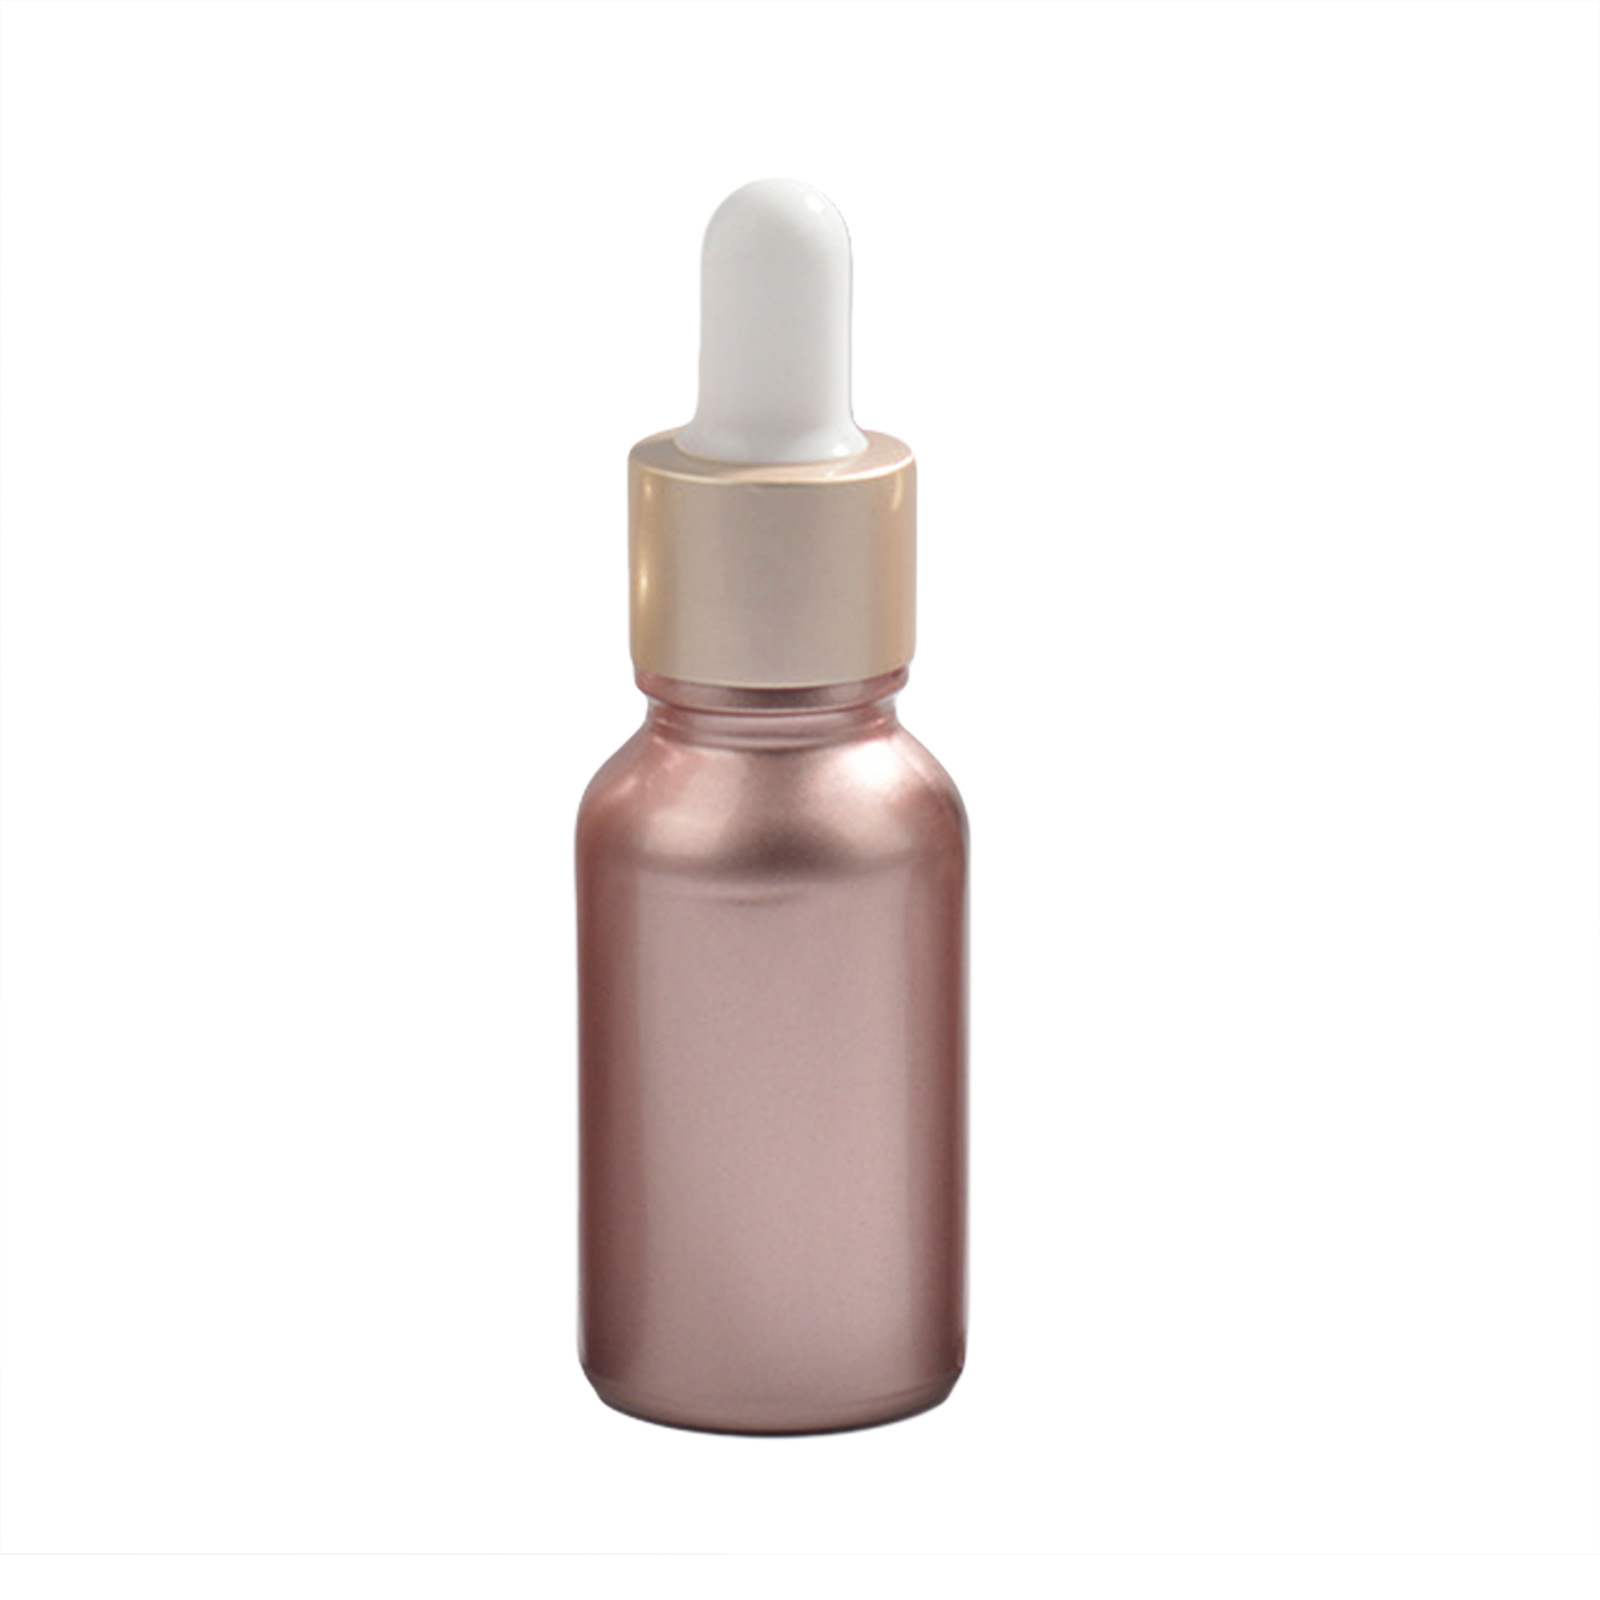 1pc Rose Gold Glass Essential Oil Dropper Bottles 10ML 15ML 30ML Empty Cosmetic Packaging Perfume Bottles - image 1 of 10